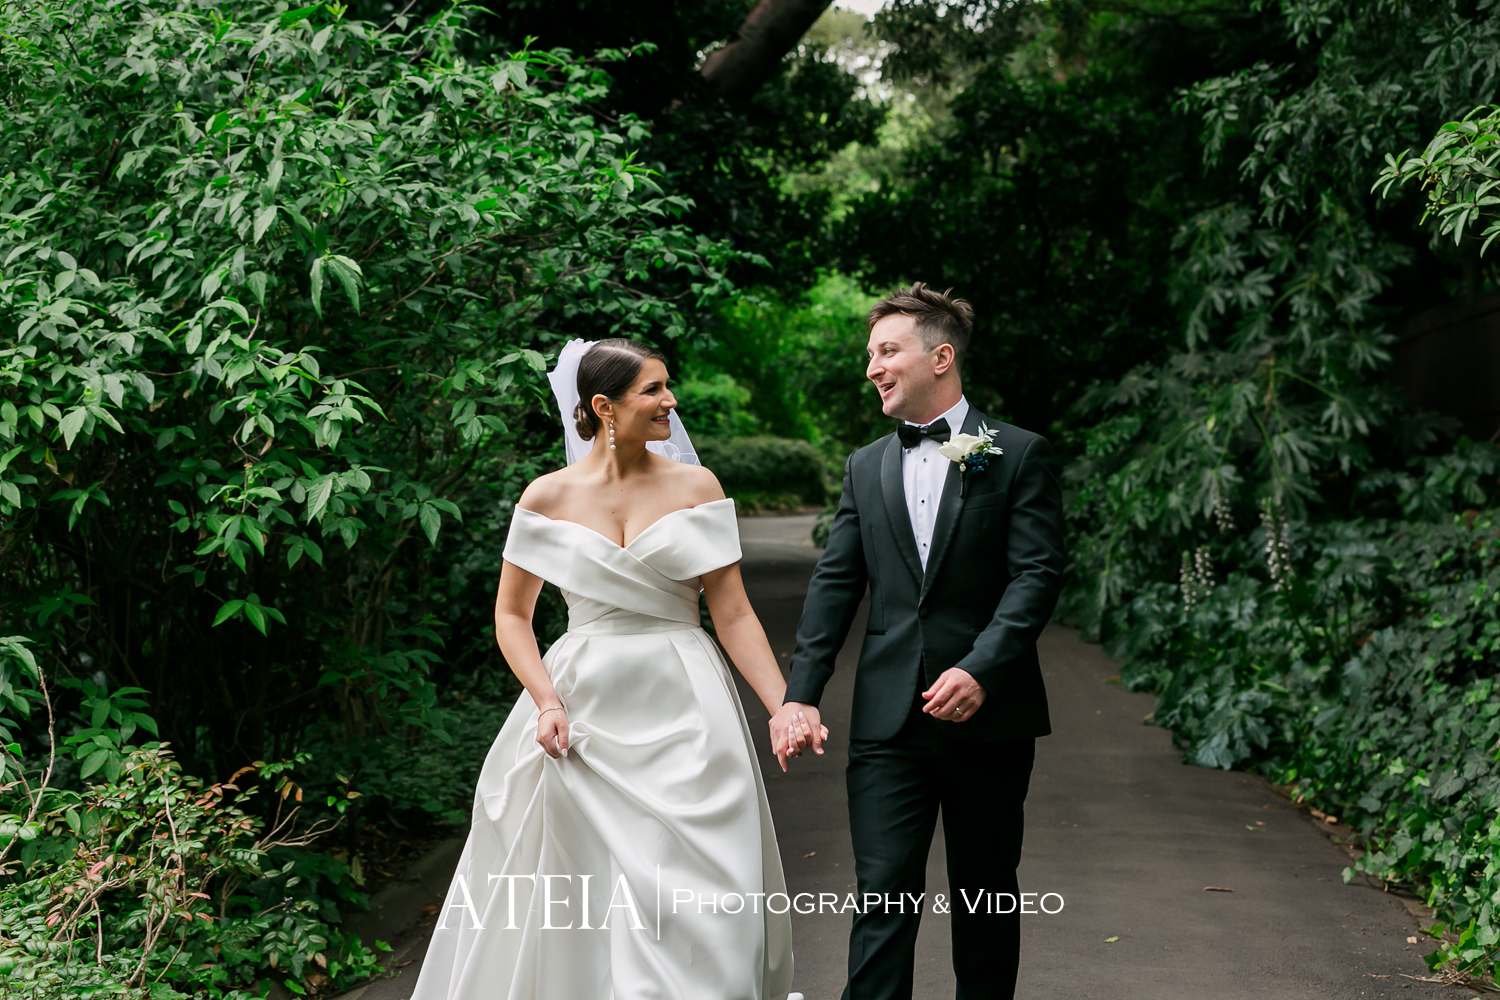 , Natalie and Chris&#8217; wedding photography at The Terrace Royal Botanical Gardens captured by ATEIA Photography &#038; Video